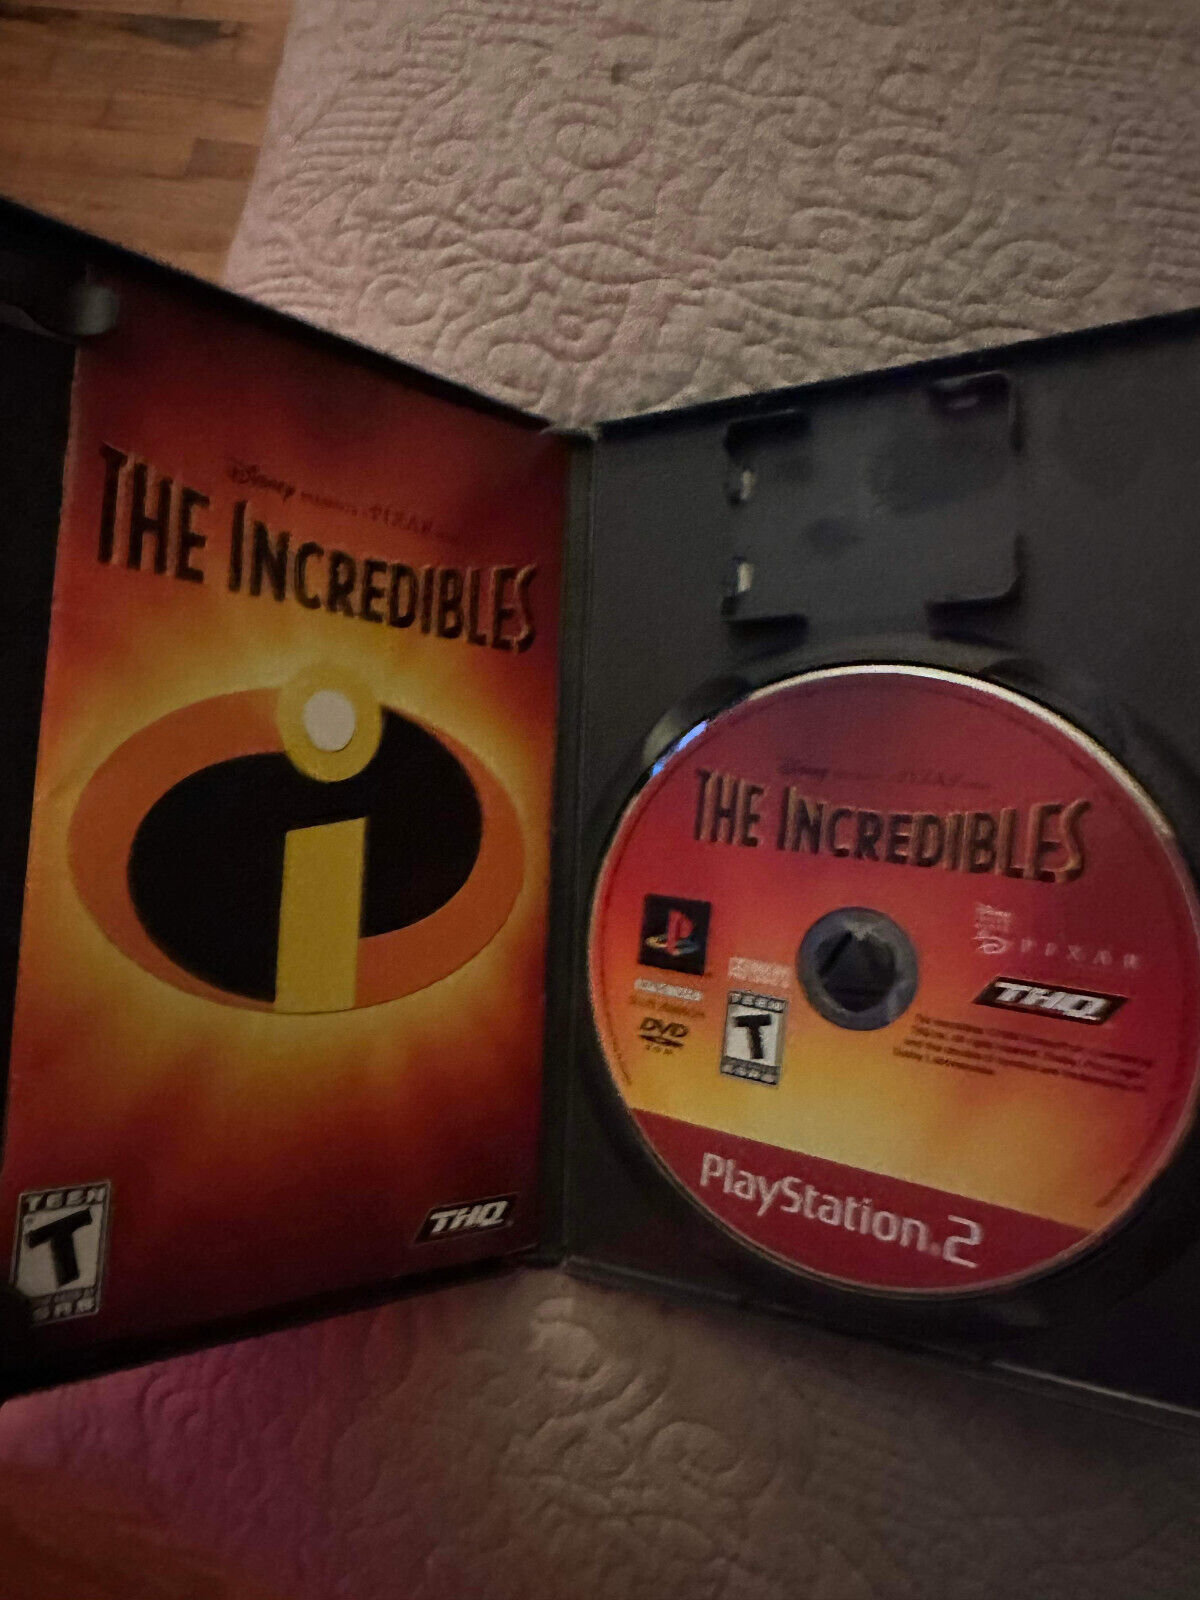 The Incredibles Playstation 2 PS2 Game - Complete W/ Manual Tested